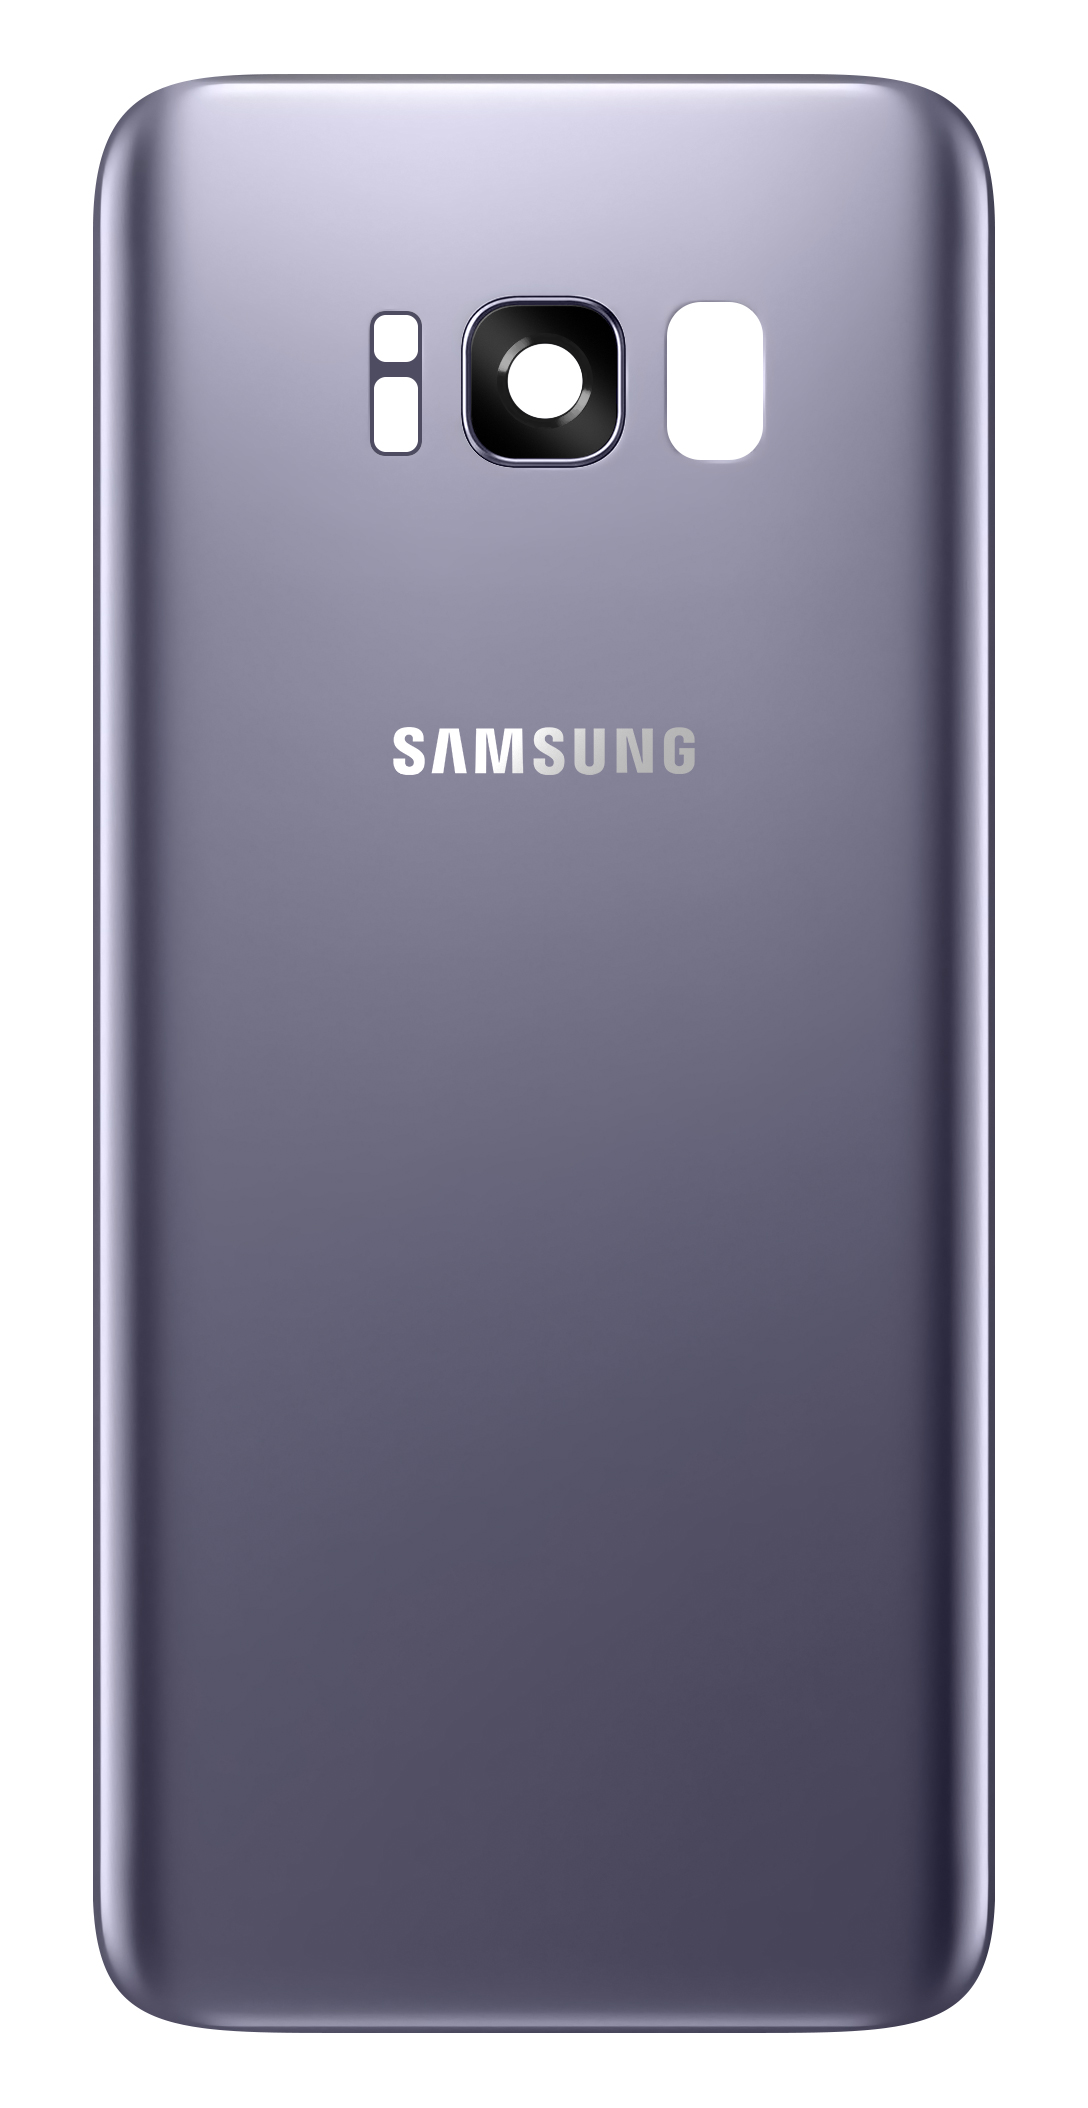 Capac Baterie Samsung Galaxy S8 G950, Gri (Orchid Gray), Service Pack GH82-13962C 